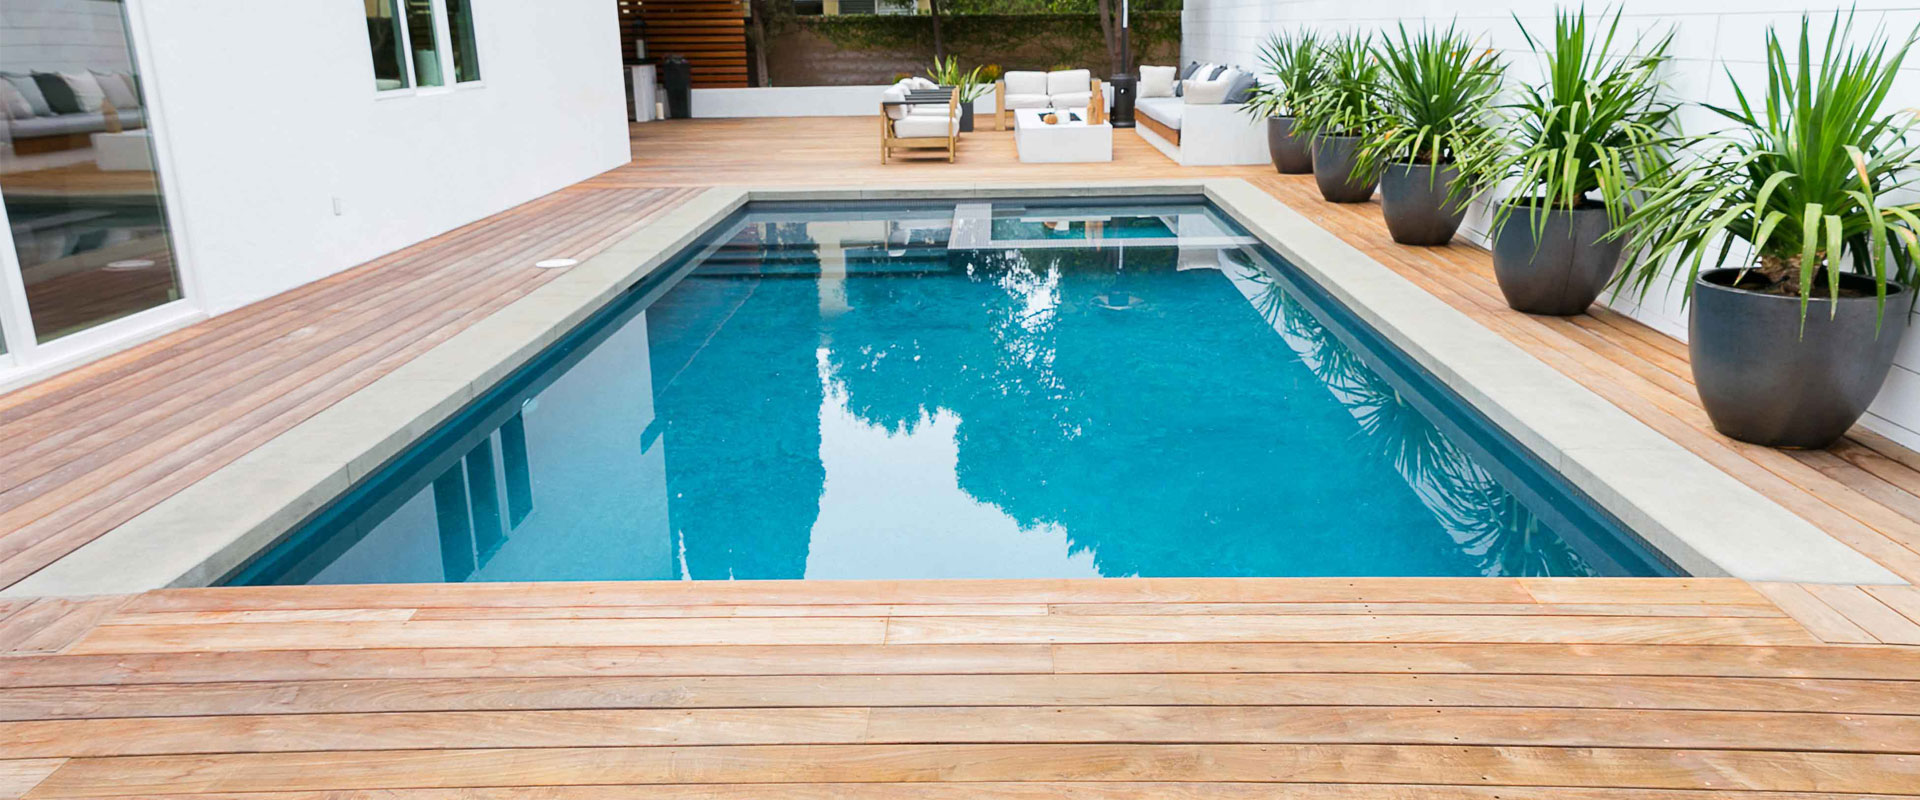 Benefits Of Pool Remodeling Services